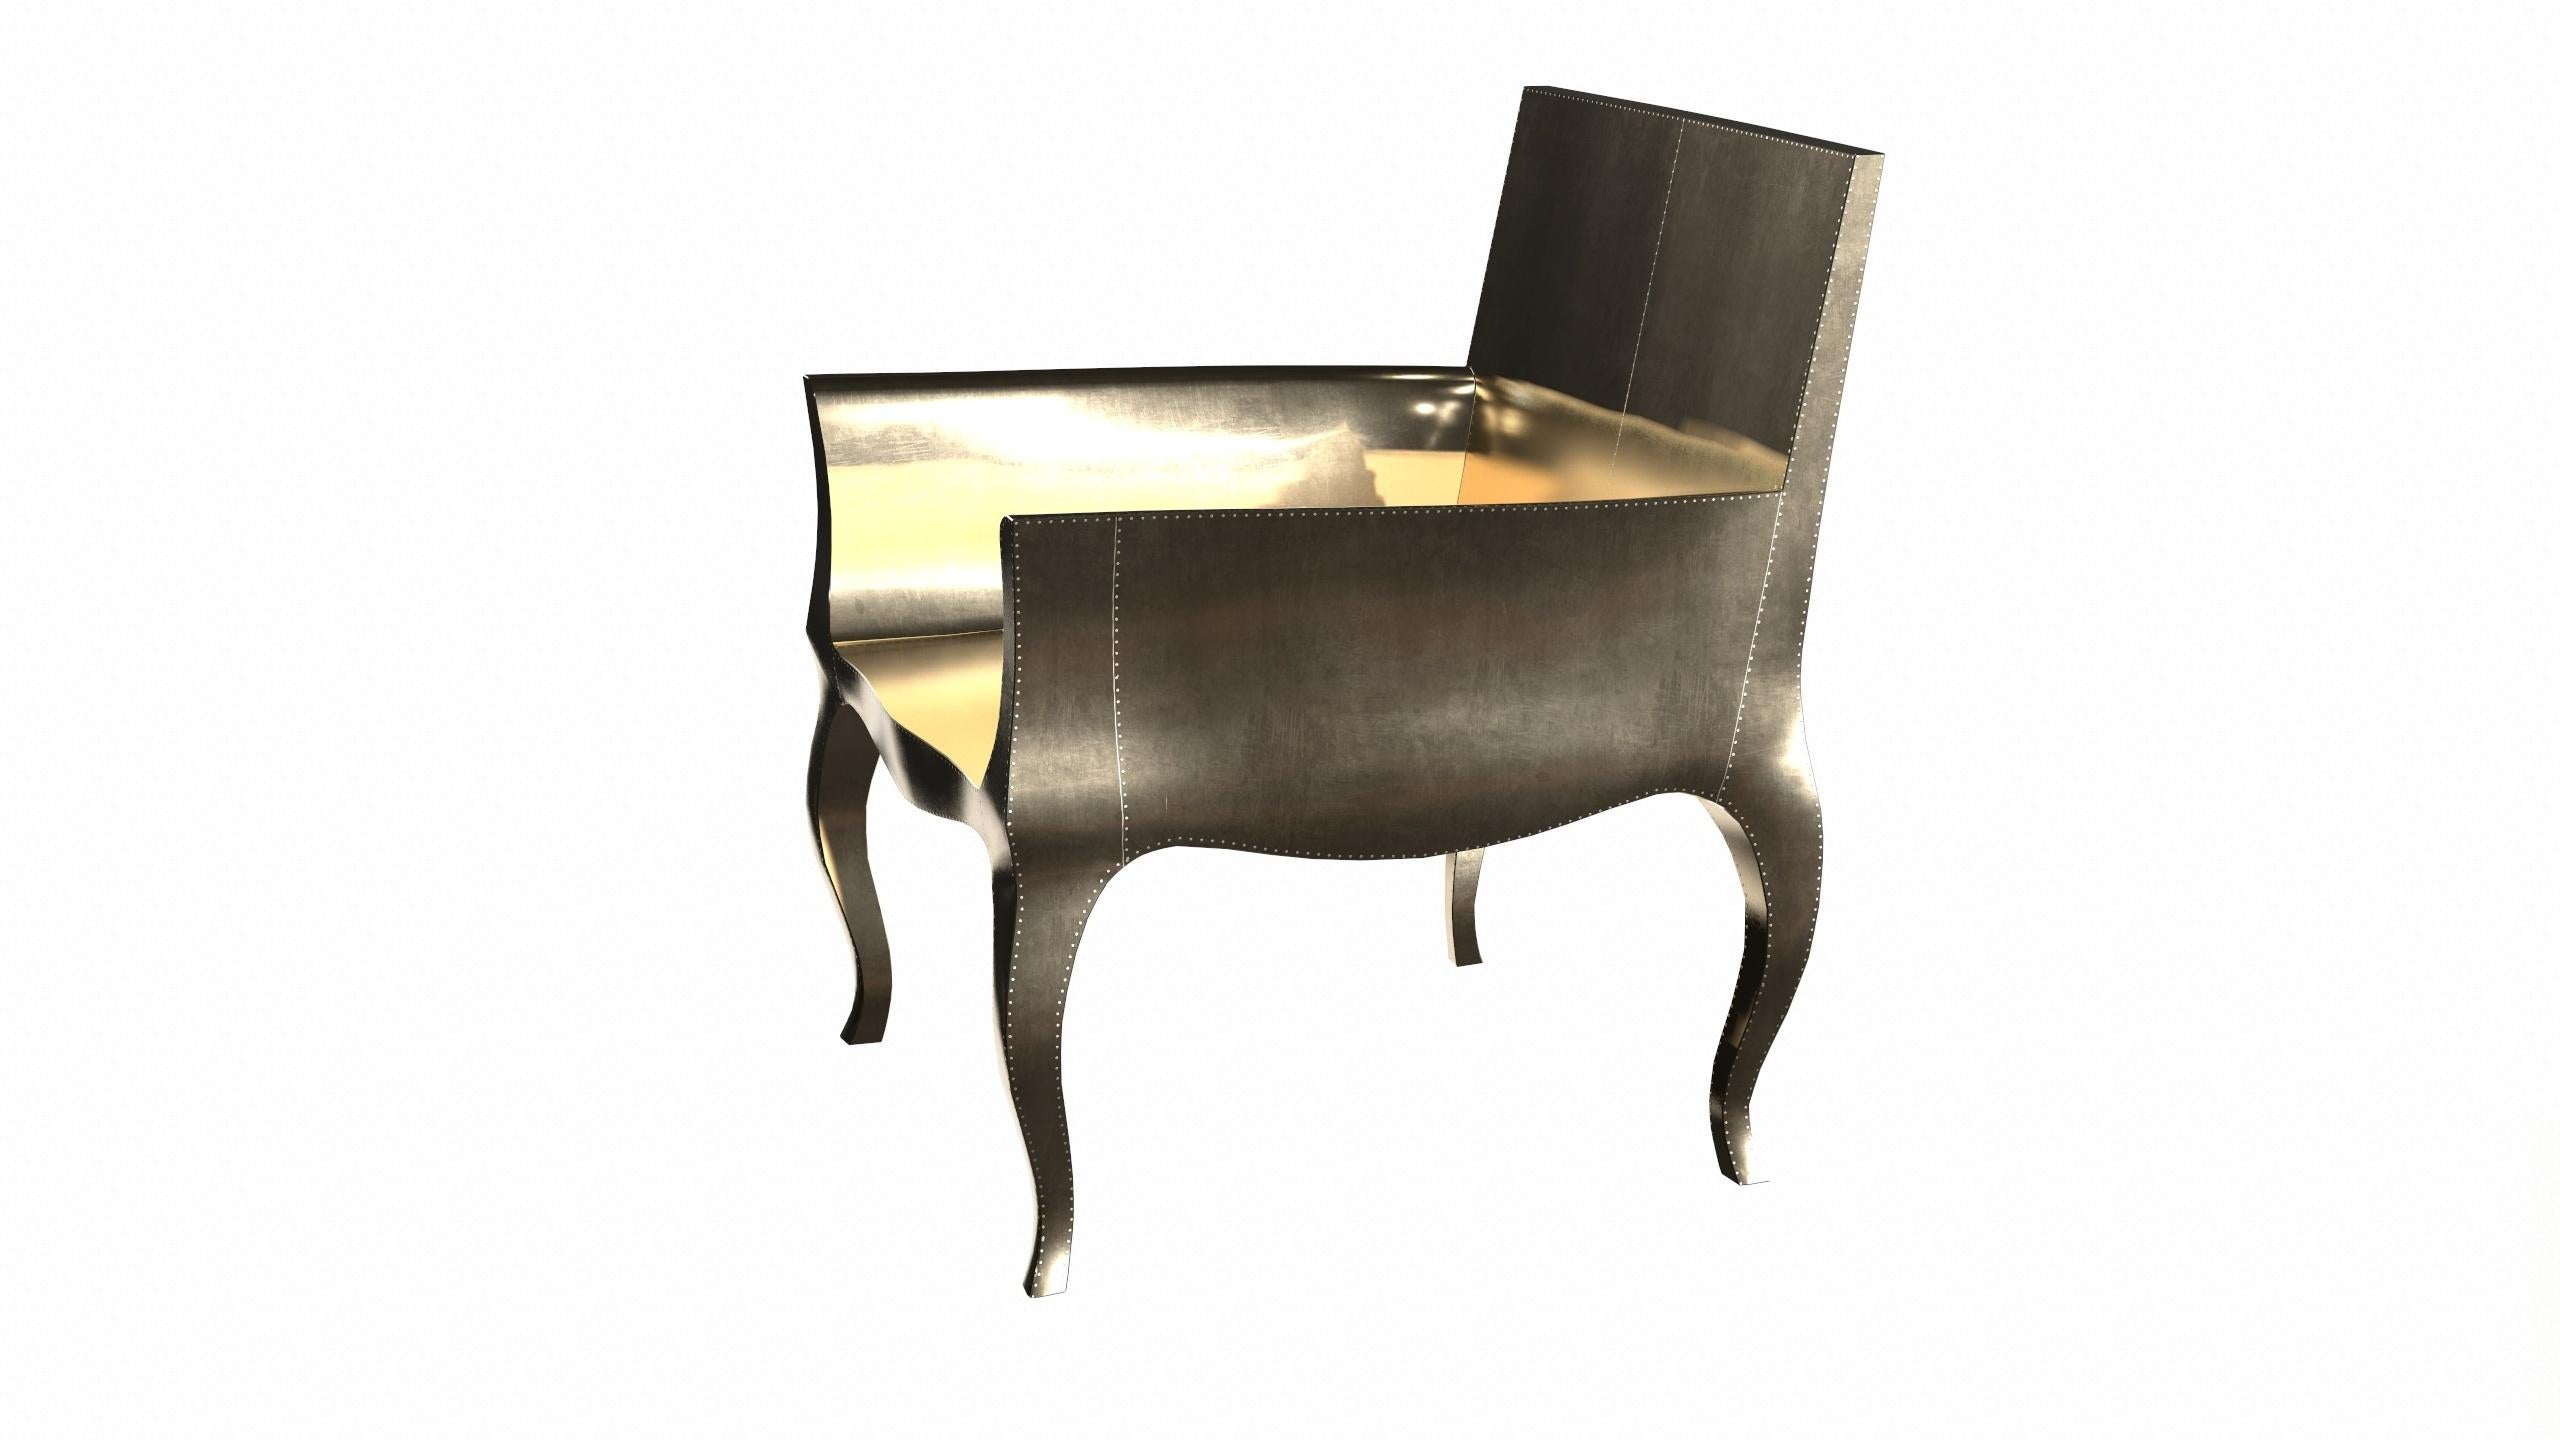 Hand-Carved Art Nouveau Dining Chairs in Smooth Brass by Paul Mathieu for S. Odegard For Sale